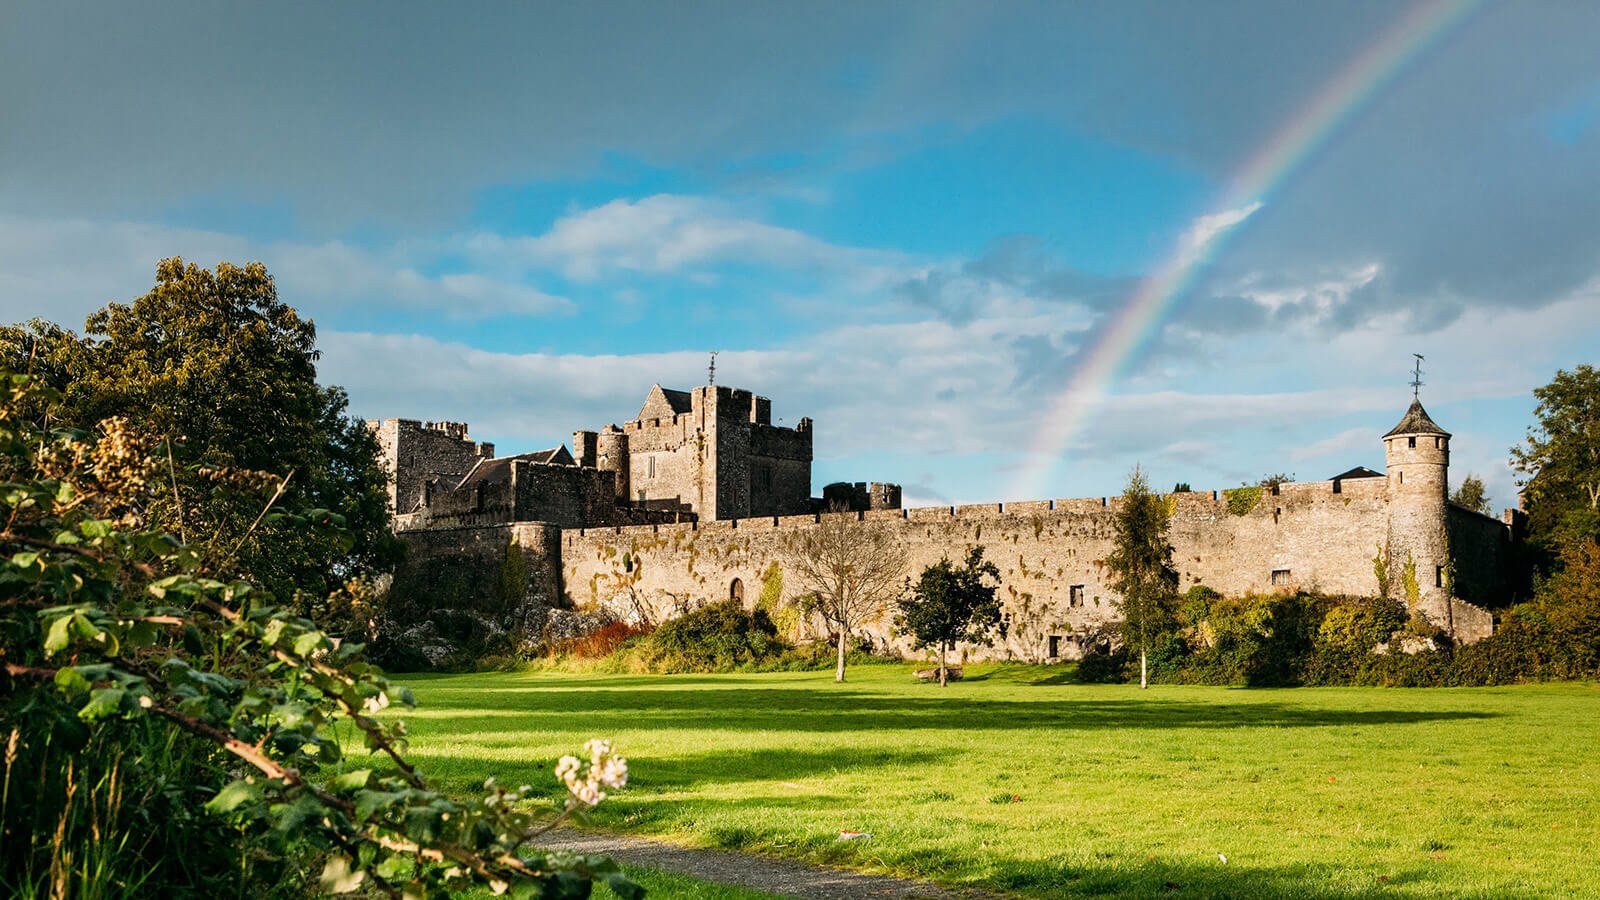 A rainbow over Cahir Castle walls with sunlit foliage in the foreground